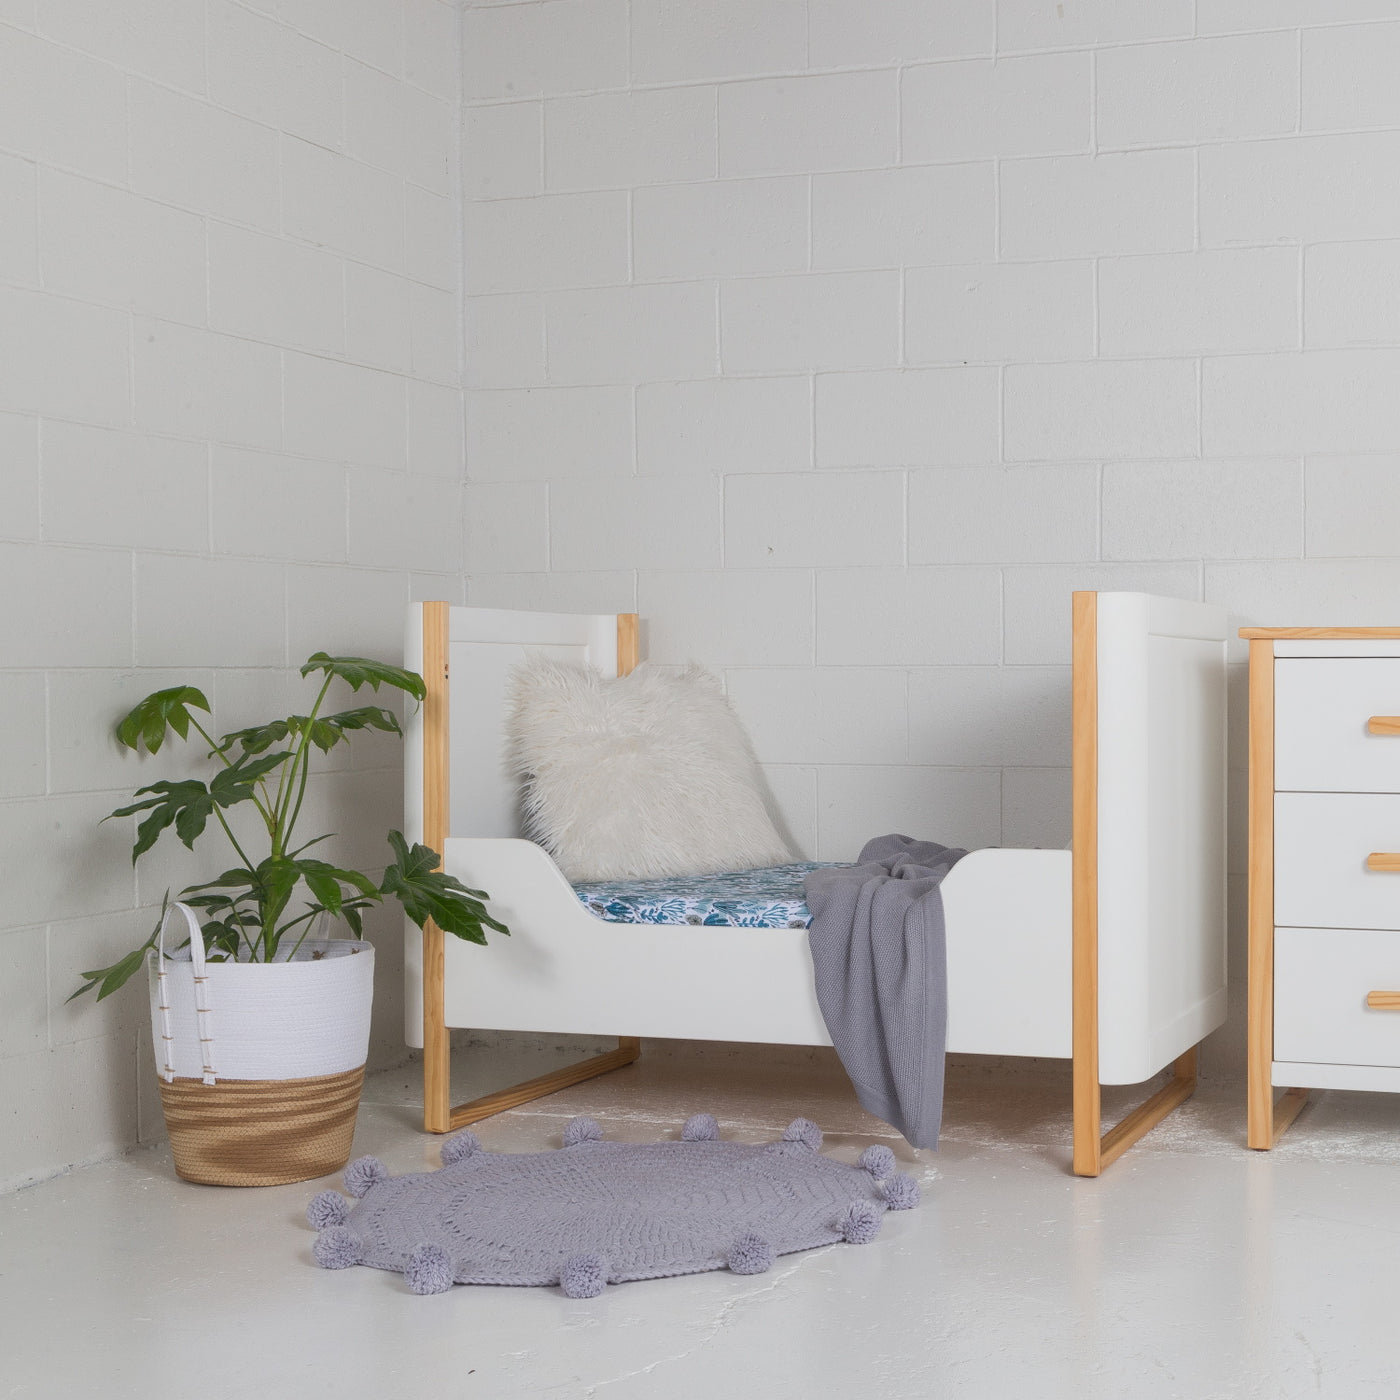 Milford Toddler Bed - Conversion Kit Only